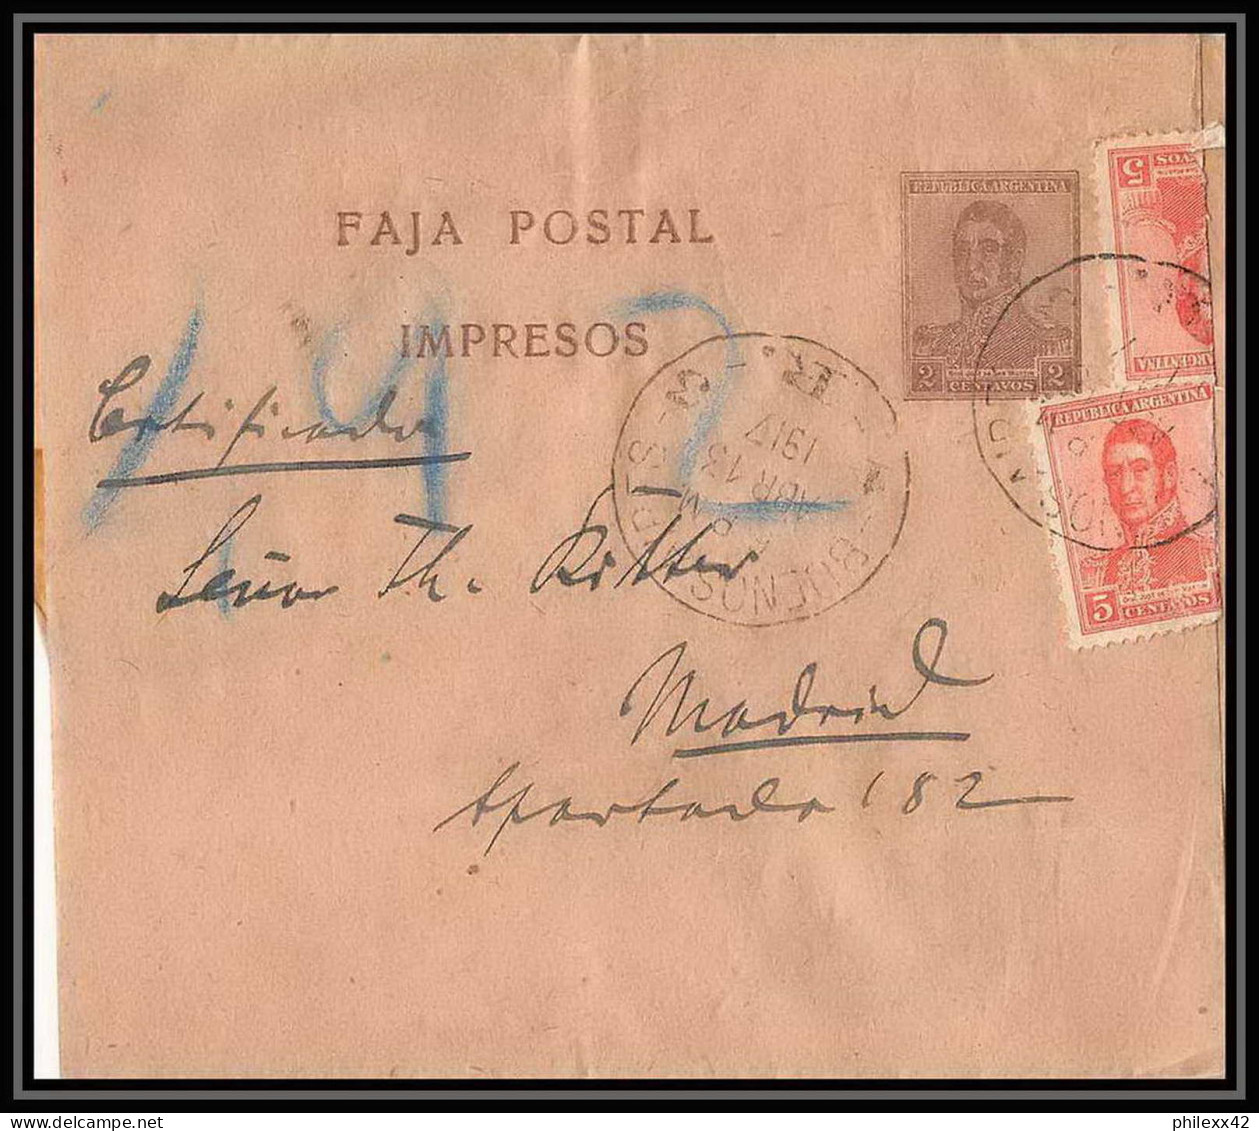 4276/ Argentine (Argentina) Entier Stationery Bande Pour Journal Newspapers Wrapper N°45 1917 - Entiers Postaux